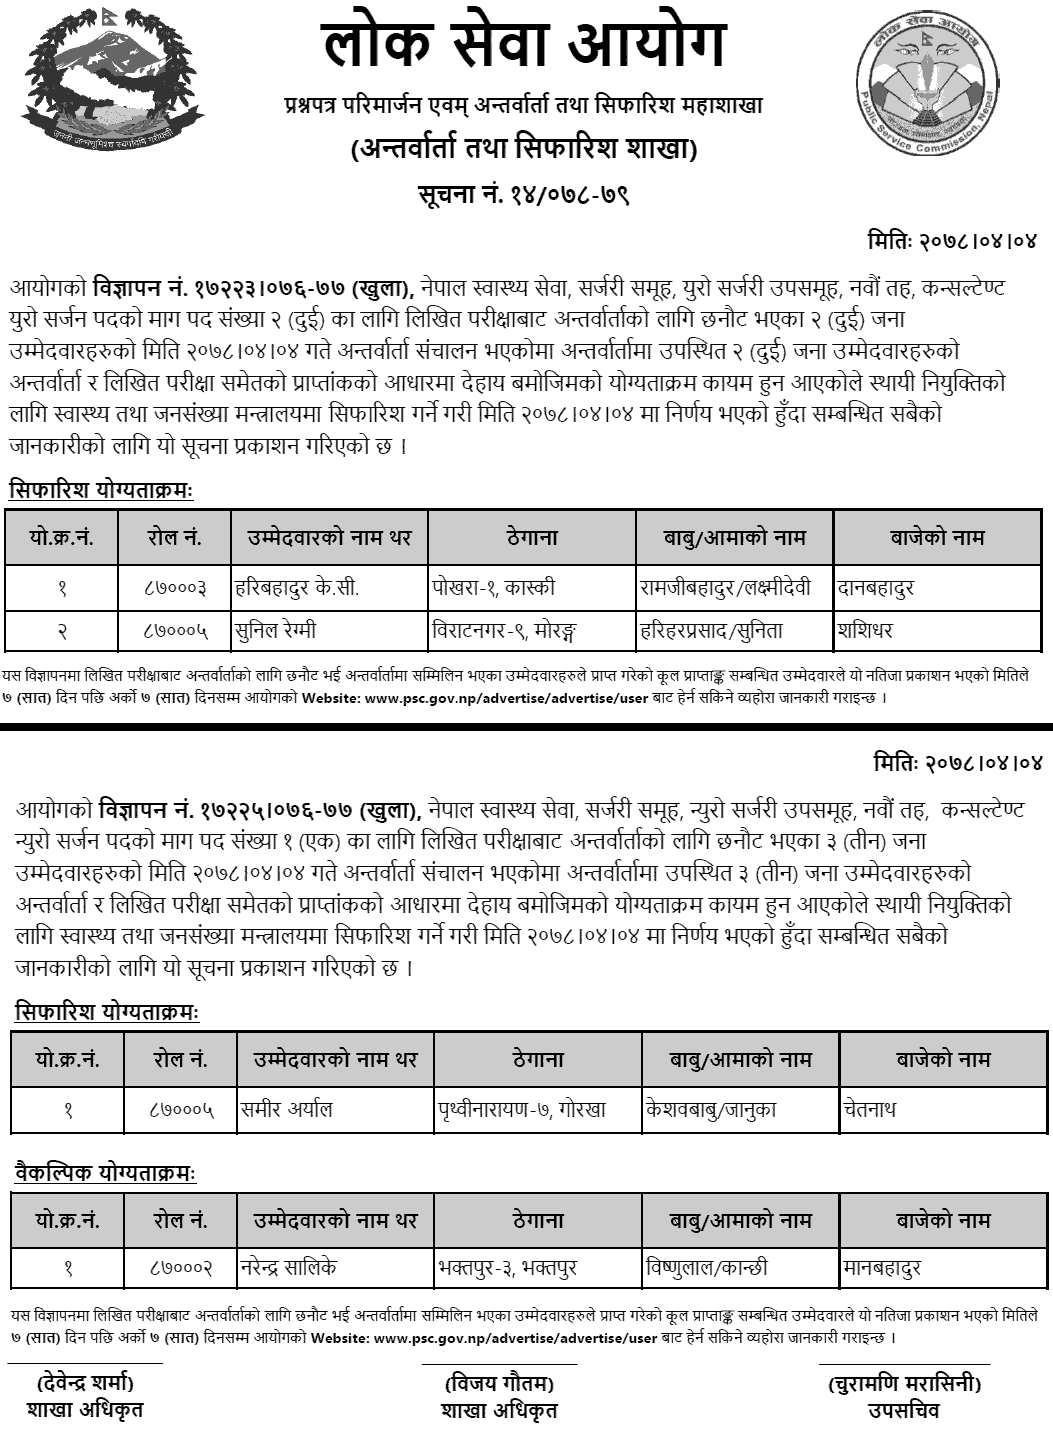 Lok Sewa Aayog Published Final Result and Recommendation of 9th Level Health Service (Neuro Surgery)